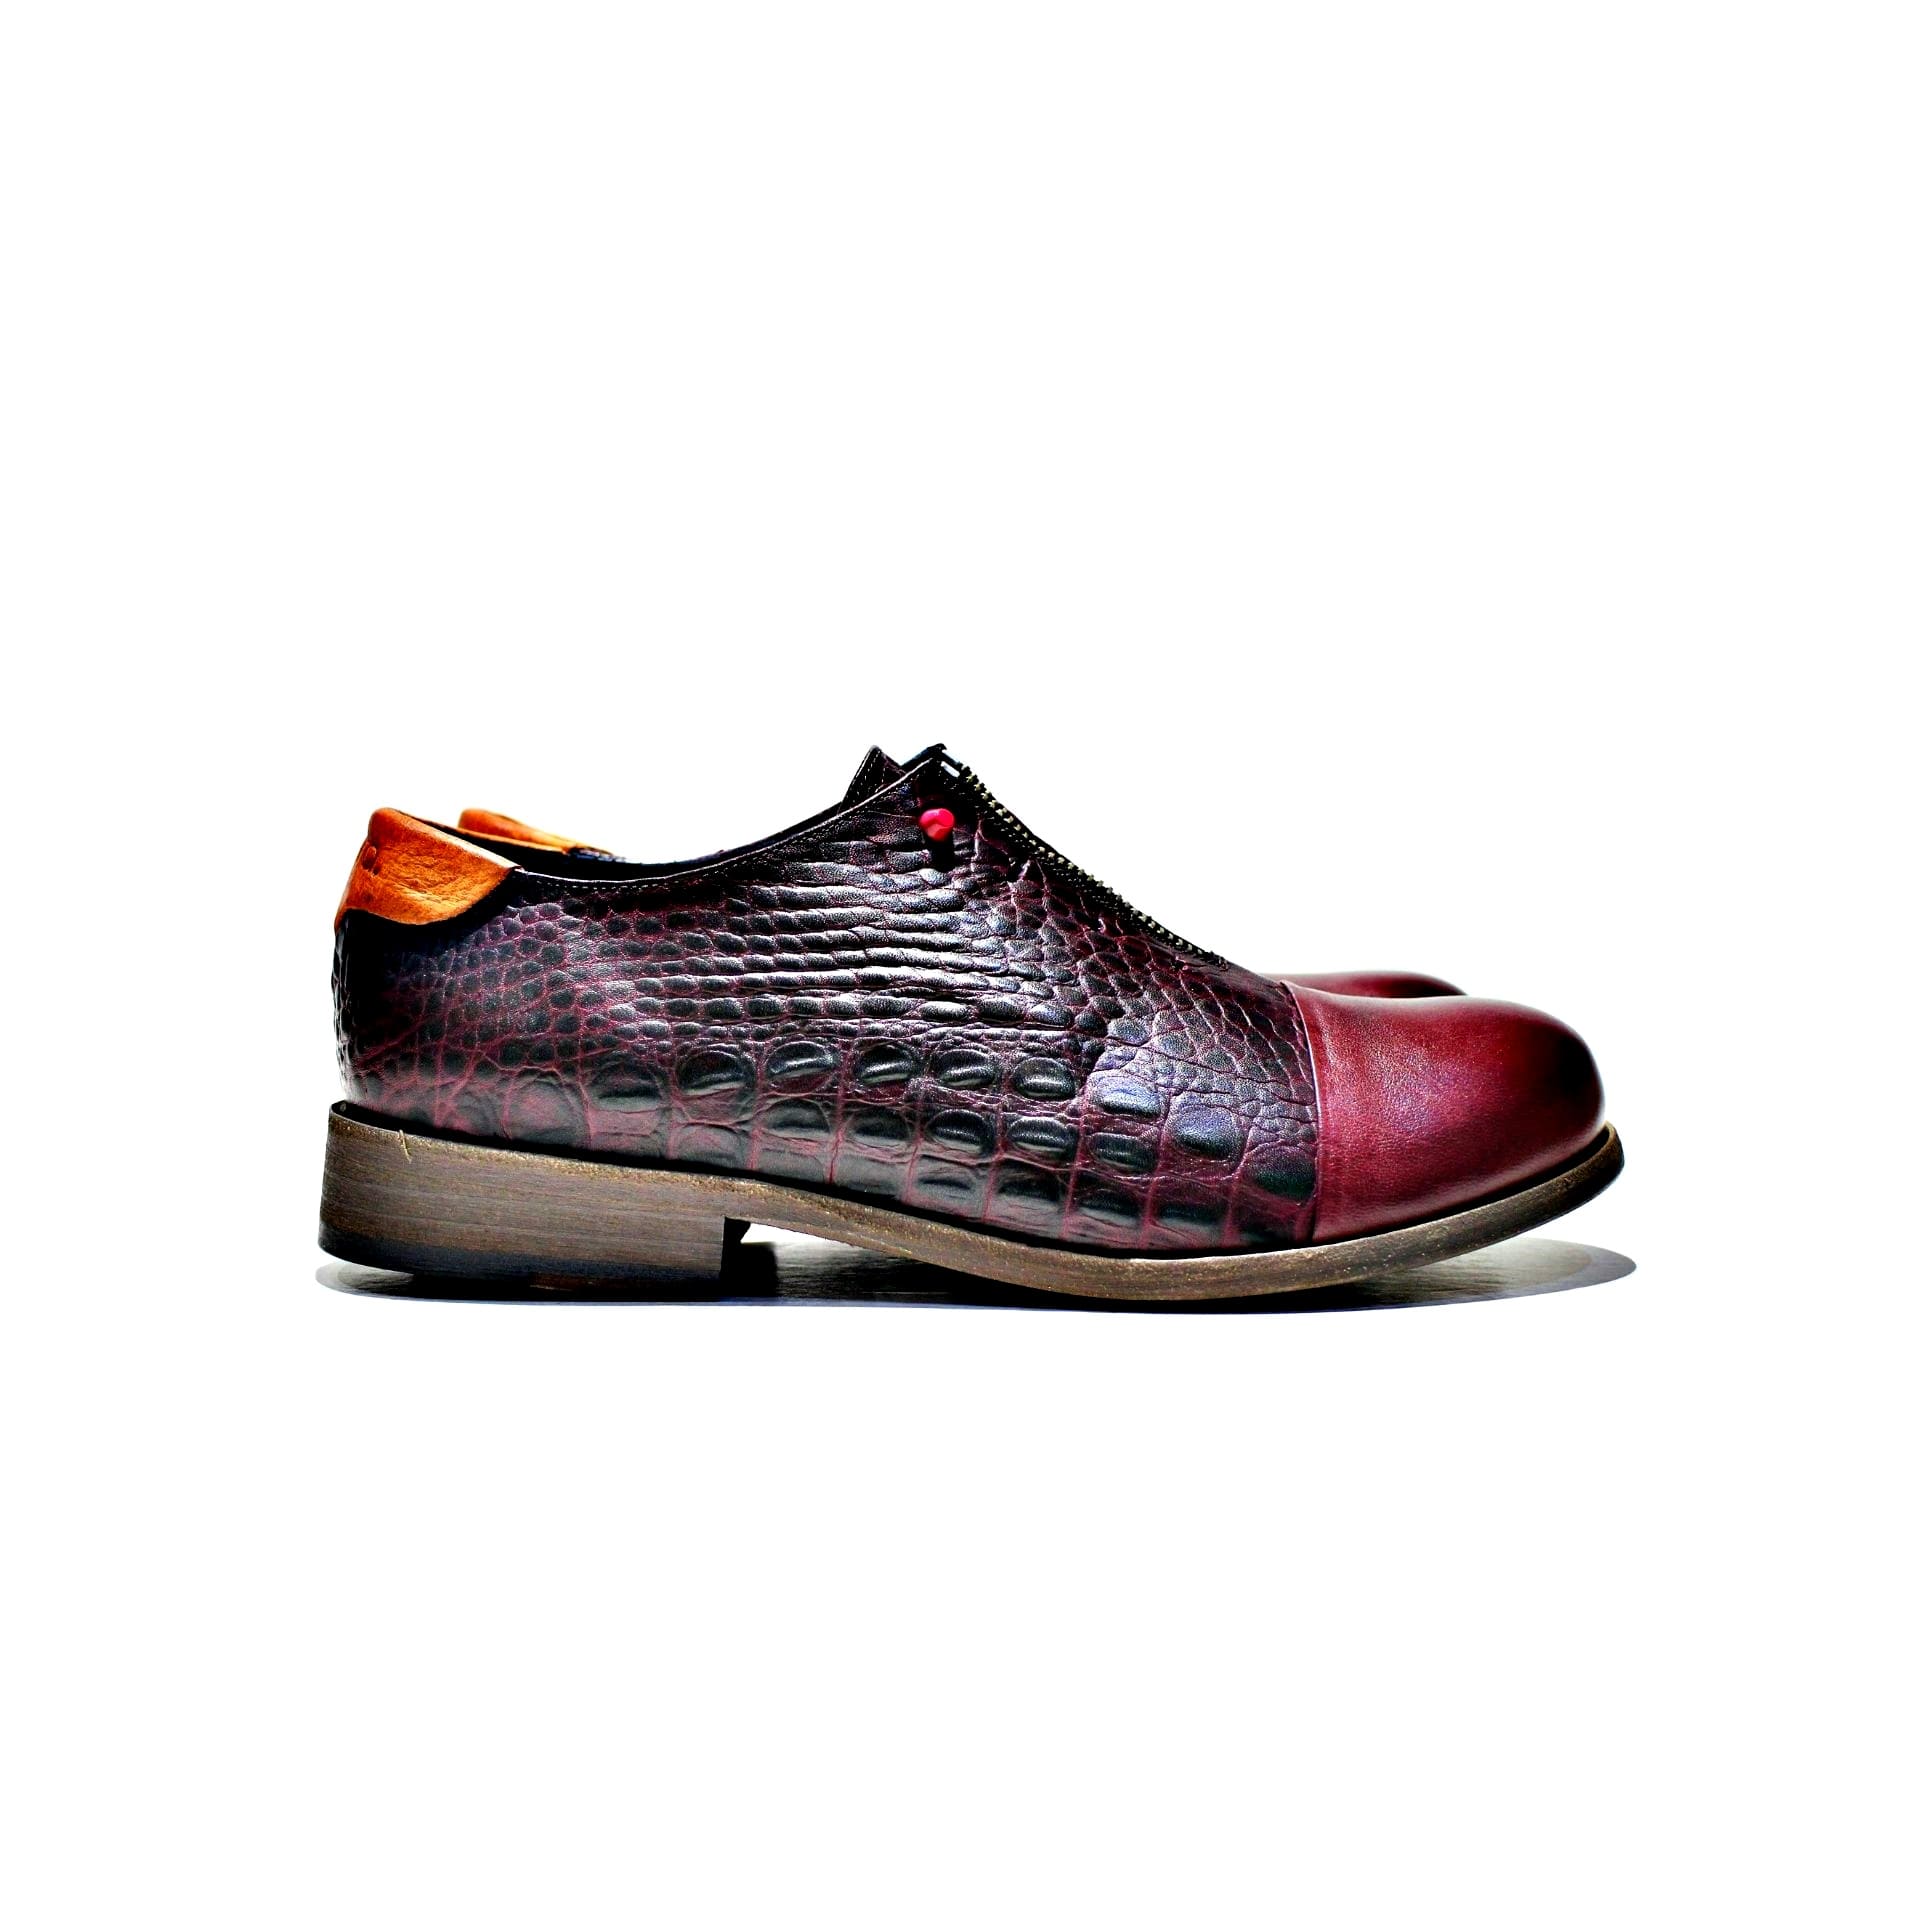 Shoes all composed of leather, with an exclusive design. Handmade in Portugal. “Walk with Pintta”